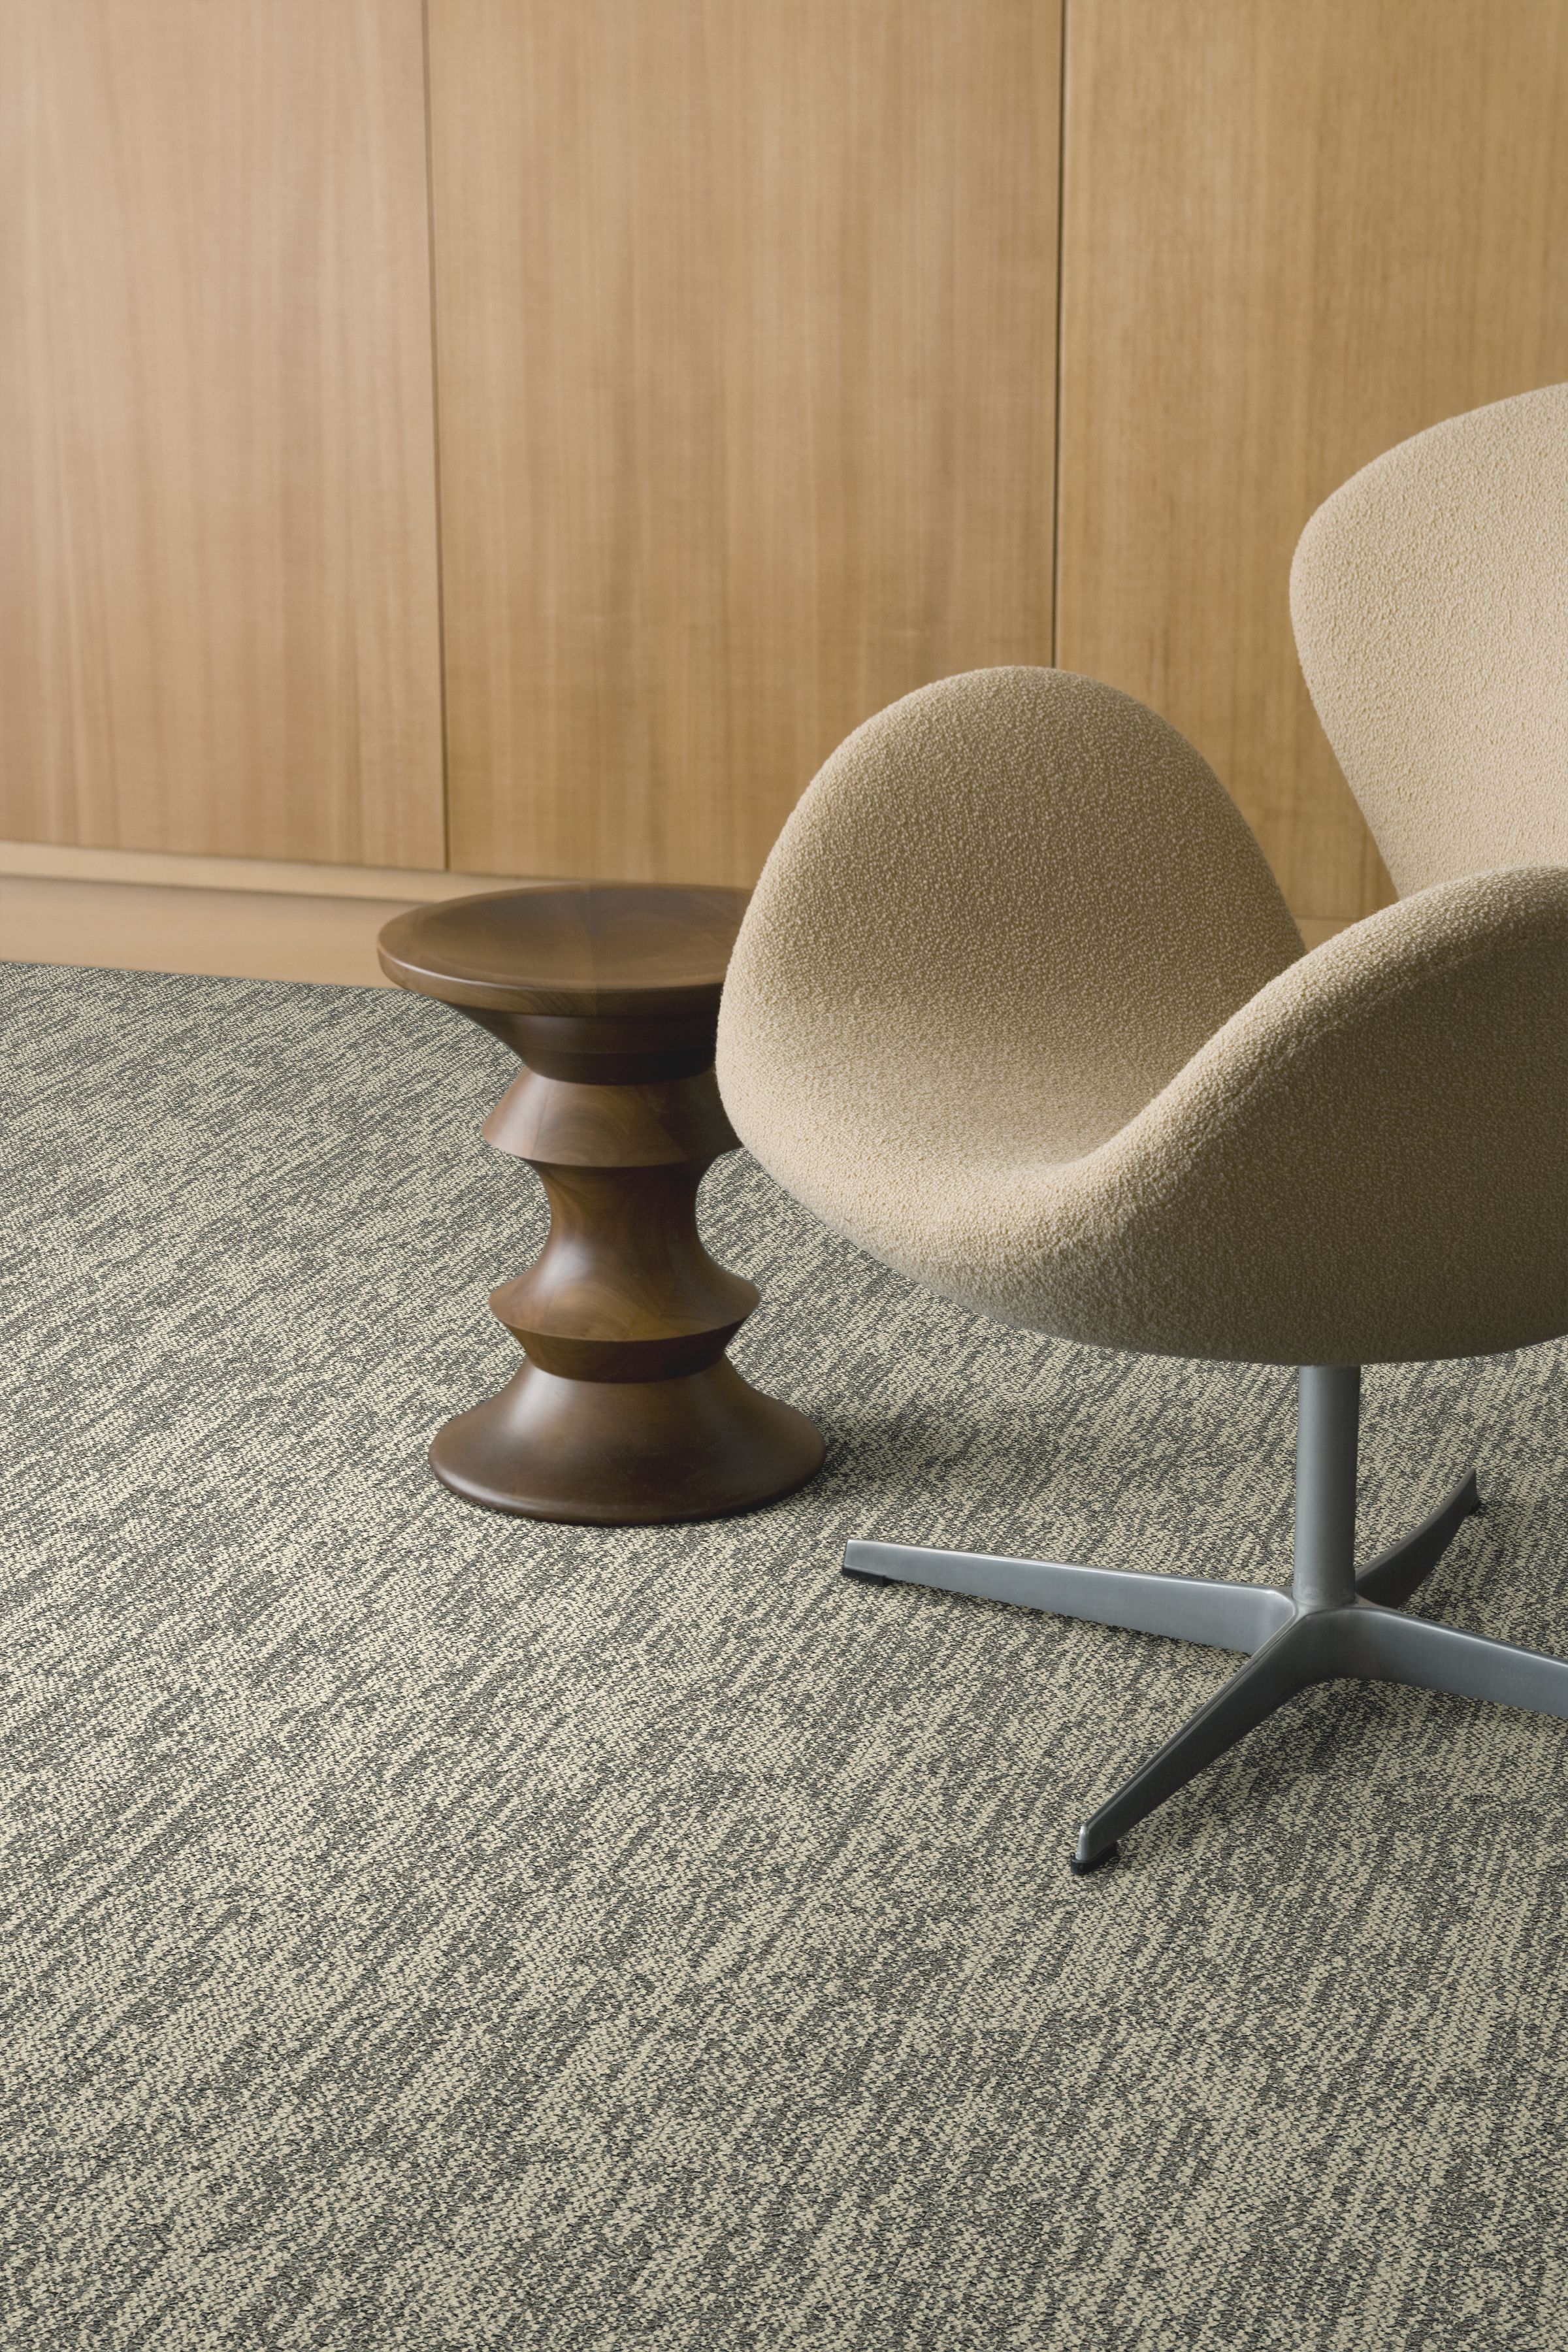 Interface Obligato plank carpet tile with textured fabric chair and small wooden art deco table imagen número 5